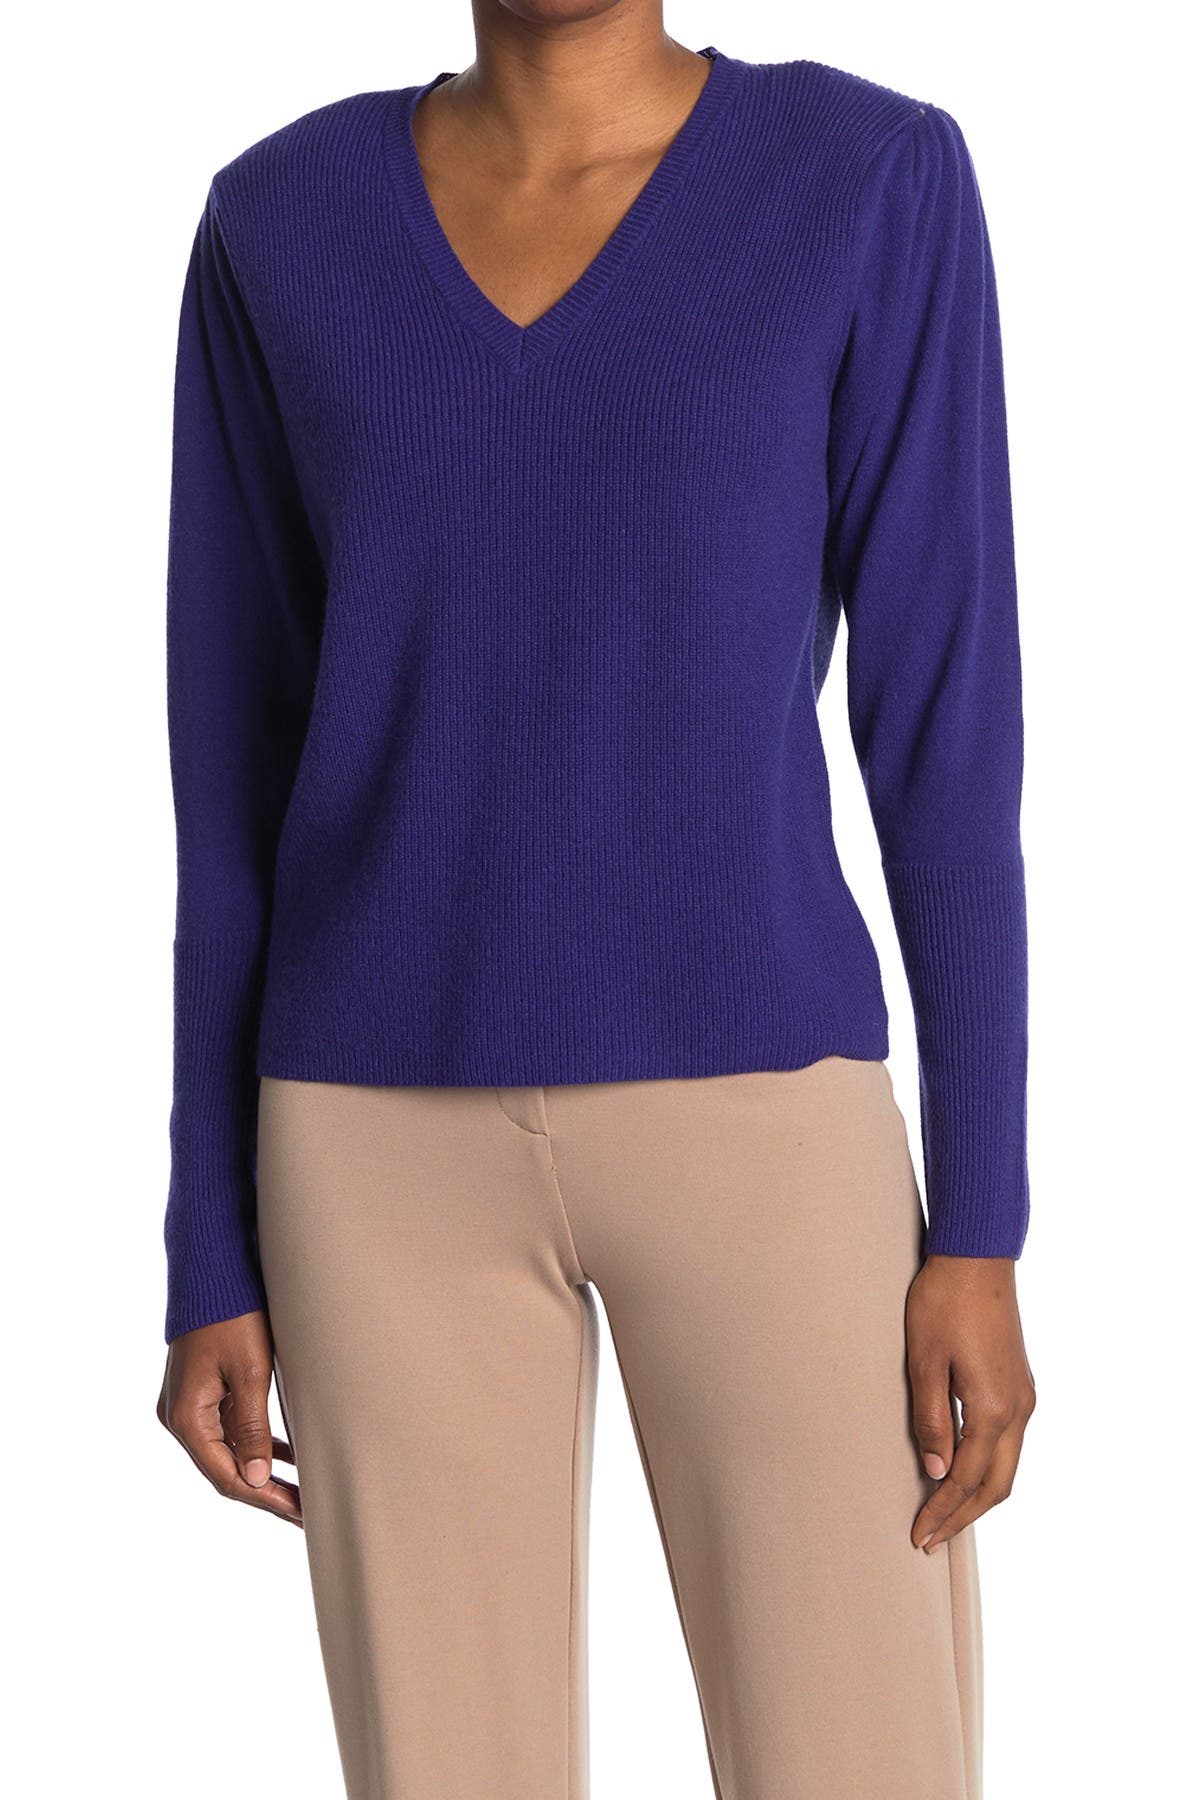 Nicole Miller V-neck Puff Sleeve Cashmere Sweater In Bright Blue5